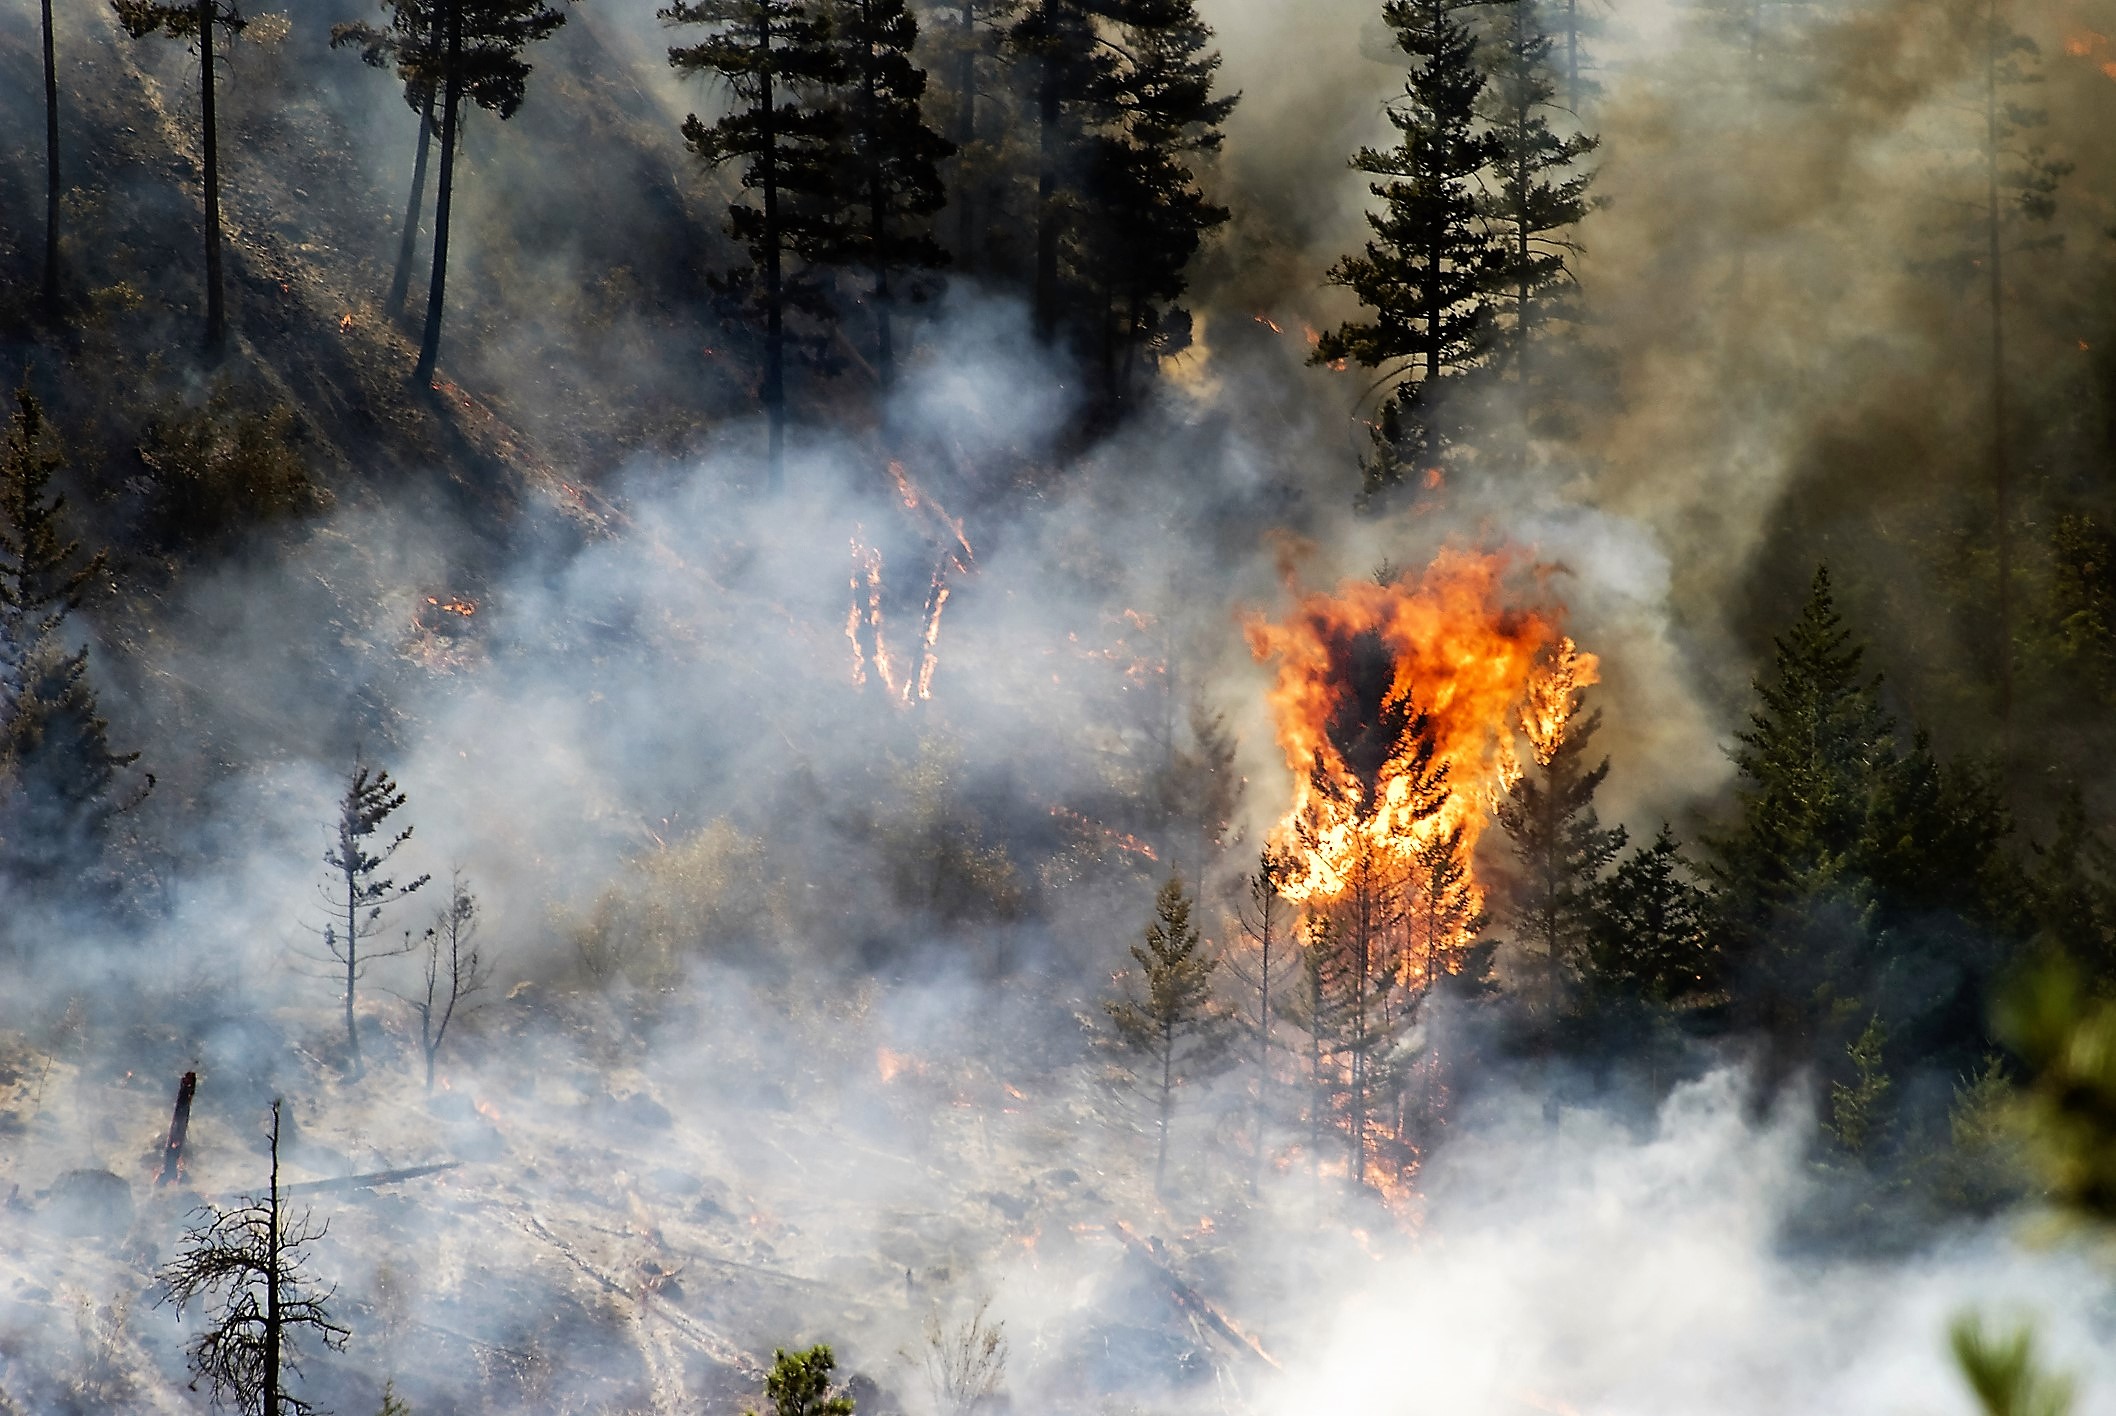 While climate change and human behaviour may spark wildfires in some parts of Canada's boreal forest, NRCan-CFS researcher Martin Girardin's work focuses on an area in Manitoba that is tracking lower than historic levels.